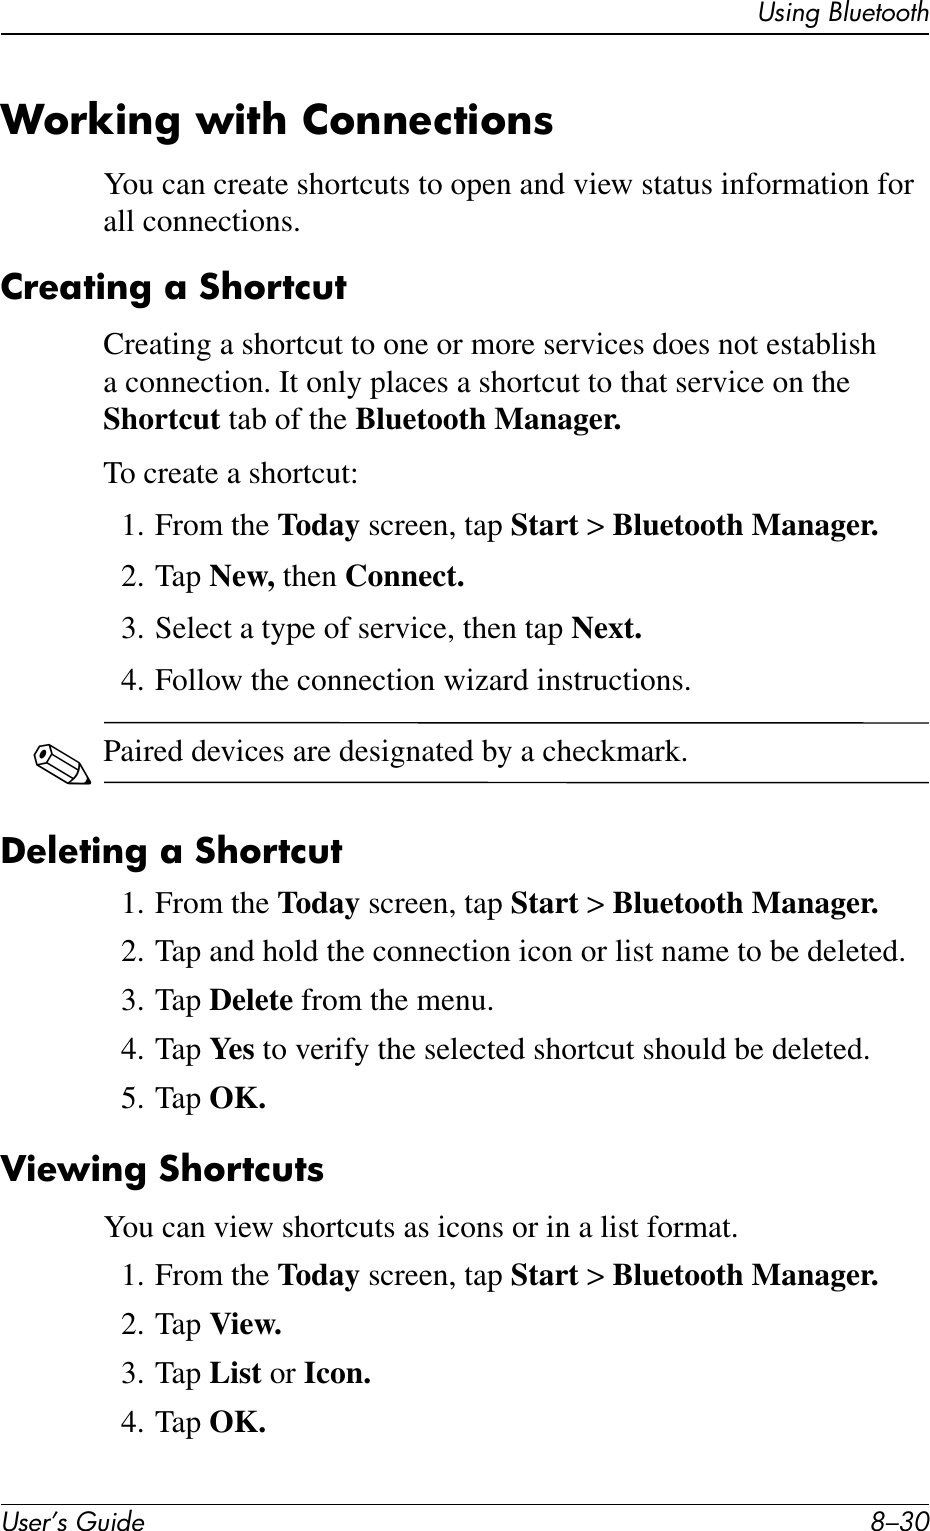 User’s Guide 8–30Using BluetoothWorking with ConnectionsYou can create shortcuts to open and view status information for all connections.Creating a ShortcutCreating a shortcut to one or more services does not establish a connection. It only places a shortcut to that service on the Shortcut tab of the Bluetooth Manager.To create a shortcut:1. From the Today screen, tap Start &gt; Bluetooth Manager.2. Tap New, then Connect.3. Select a type of service, then tap Next.4. Follow the connection wizard instructions.✎Paired devices are designated by a checkmark.Deleting a Shortcut1. From the Today screen, tap Start &gt; Bluetooth Manager.2. Tap and hold the connection icon or list name to be deleted.3. Tap Delete from the menu.4. Tap Ye s  to verify the selected shortcut should be deleted.5. Tap OK.Viewing ShortcutsYou can view shortcuts as icons or in a list format.1. From the Today screen, tap Start &gt; Bluetooth Manager.2. Tap View.3. Tap List or Icon.4. Tap OK.